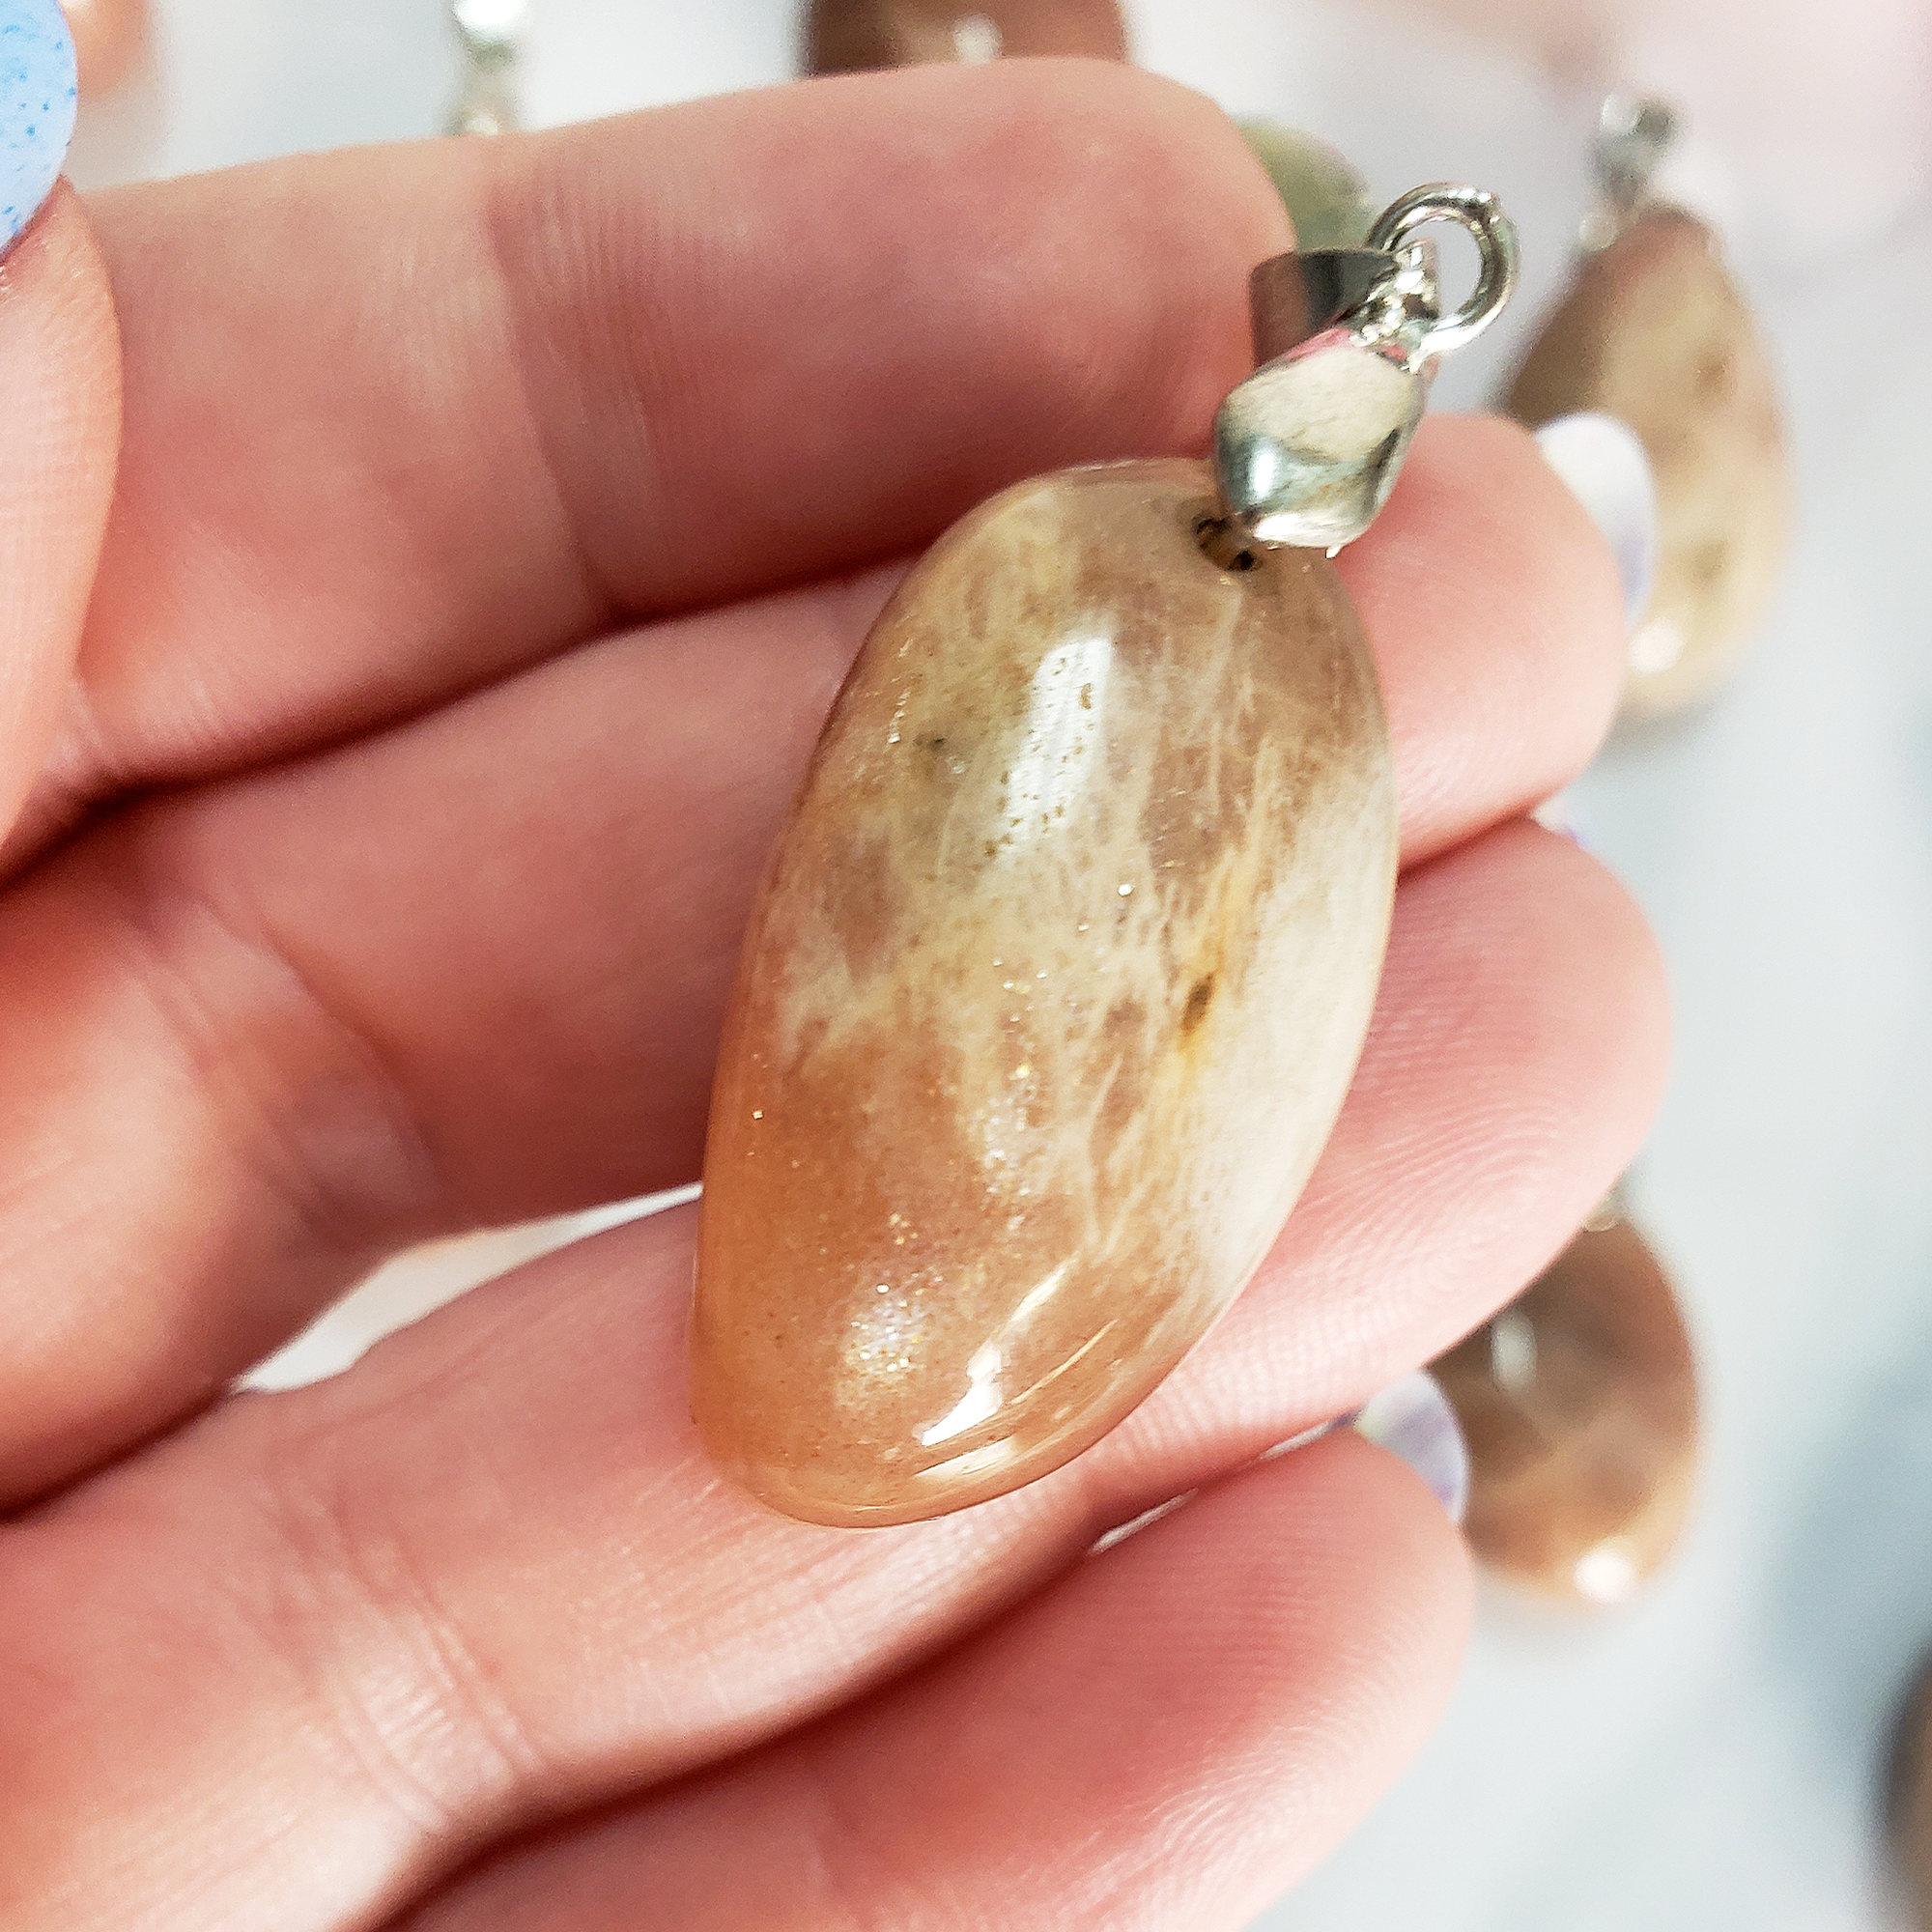 Peach Moonstone Crystal Pendant Natural Gemstone Jewelry - Close Up of Minor Flash and Inclusions